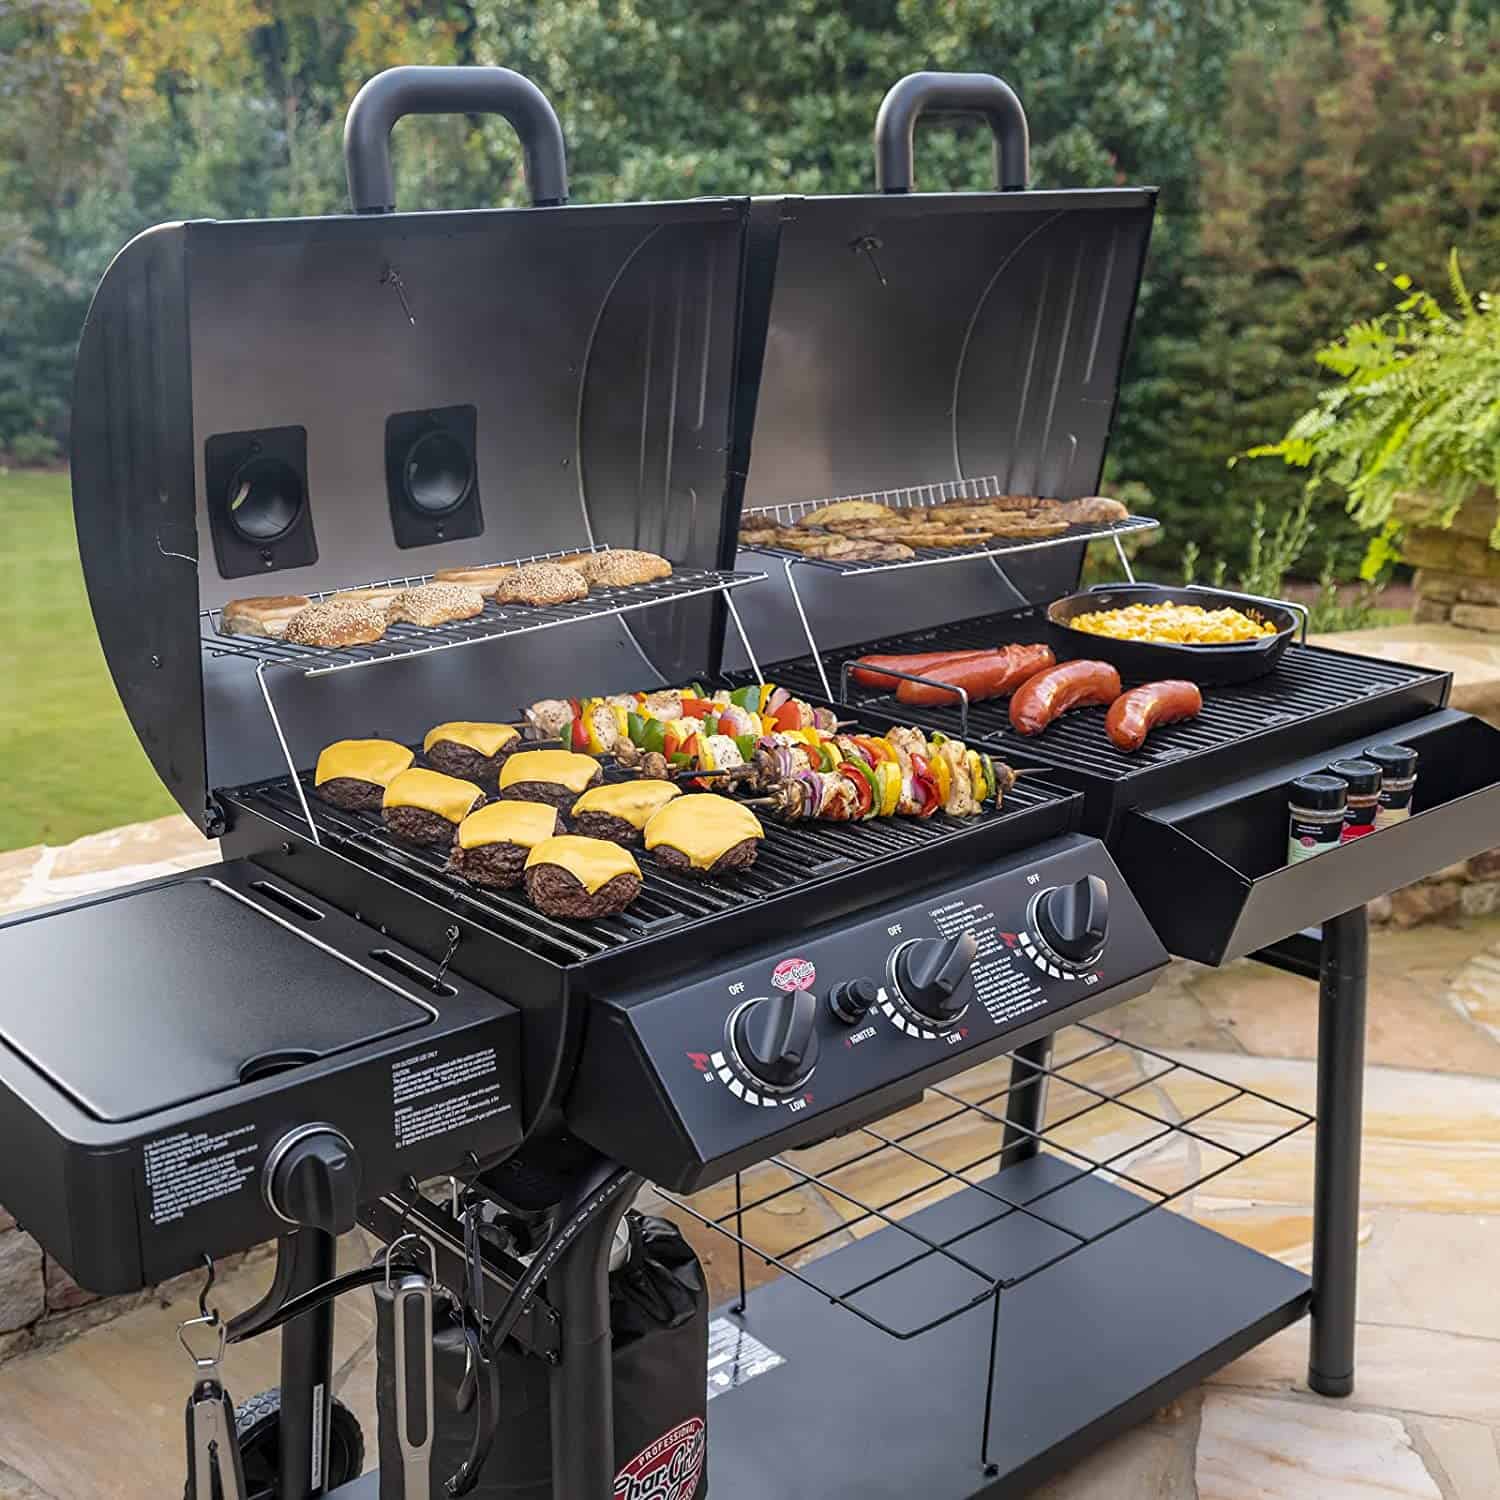 Best gas & charcoal combo grill overall- Char-Griller 5050 Duo being used